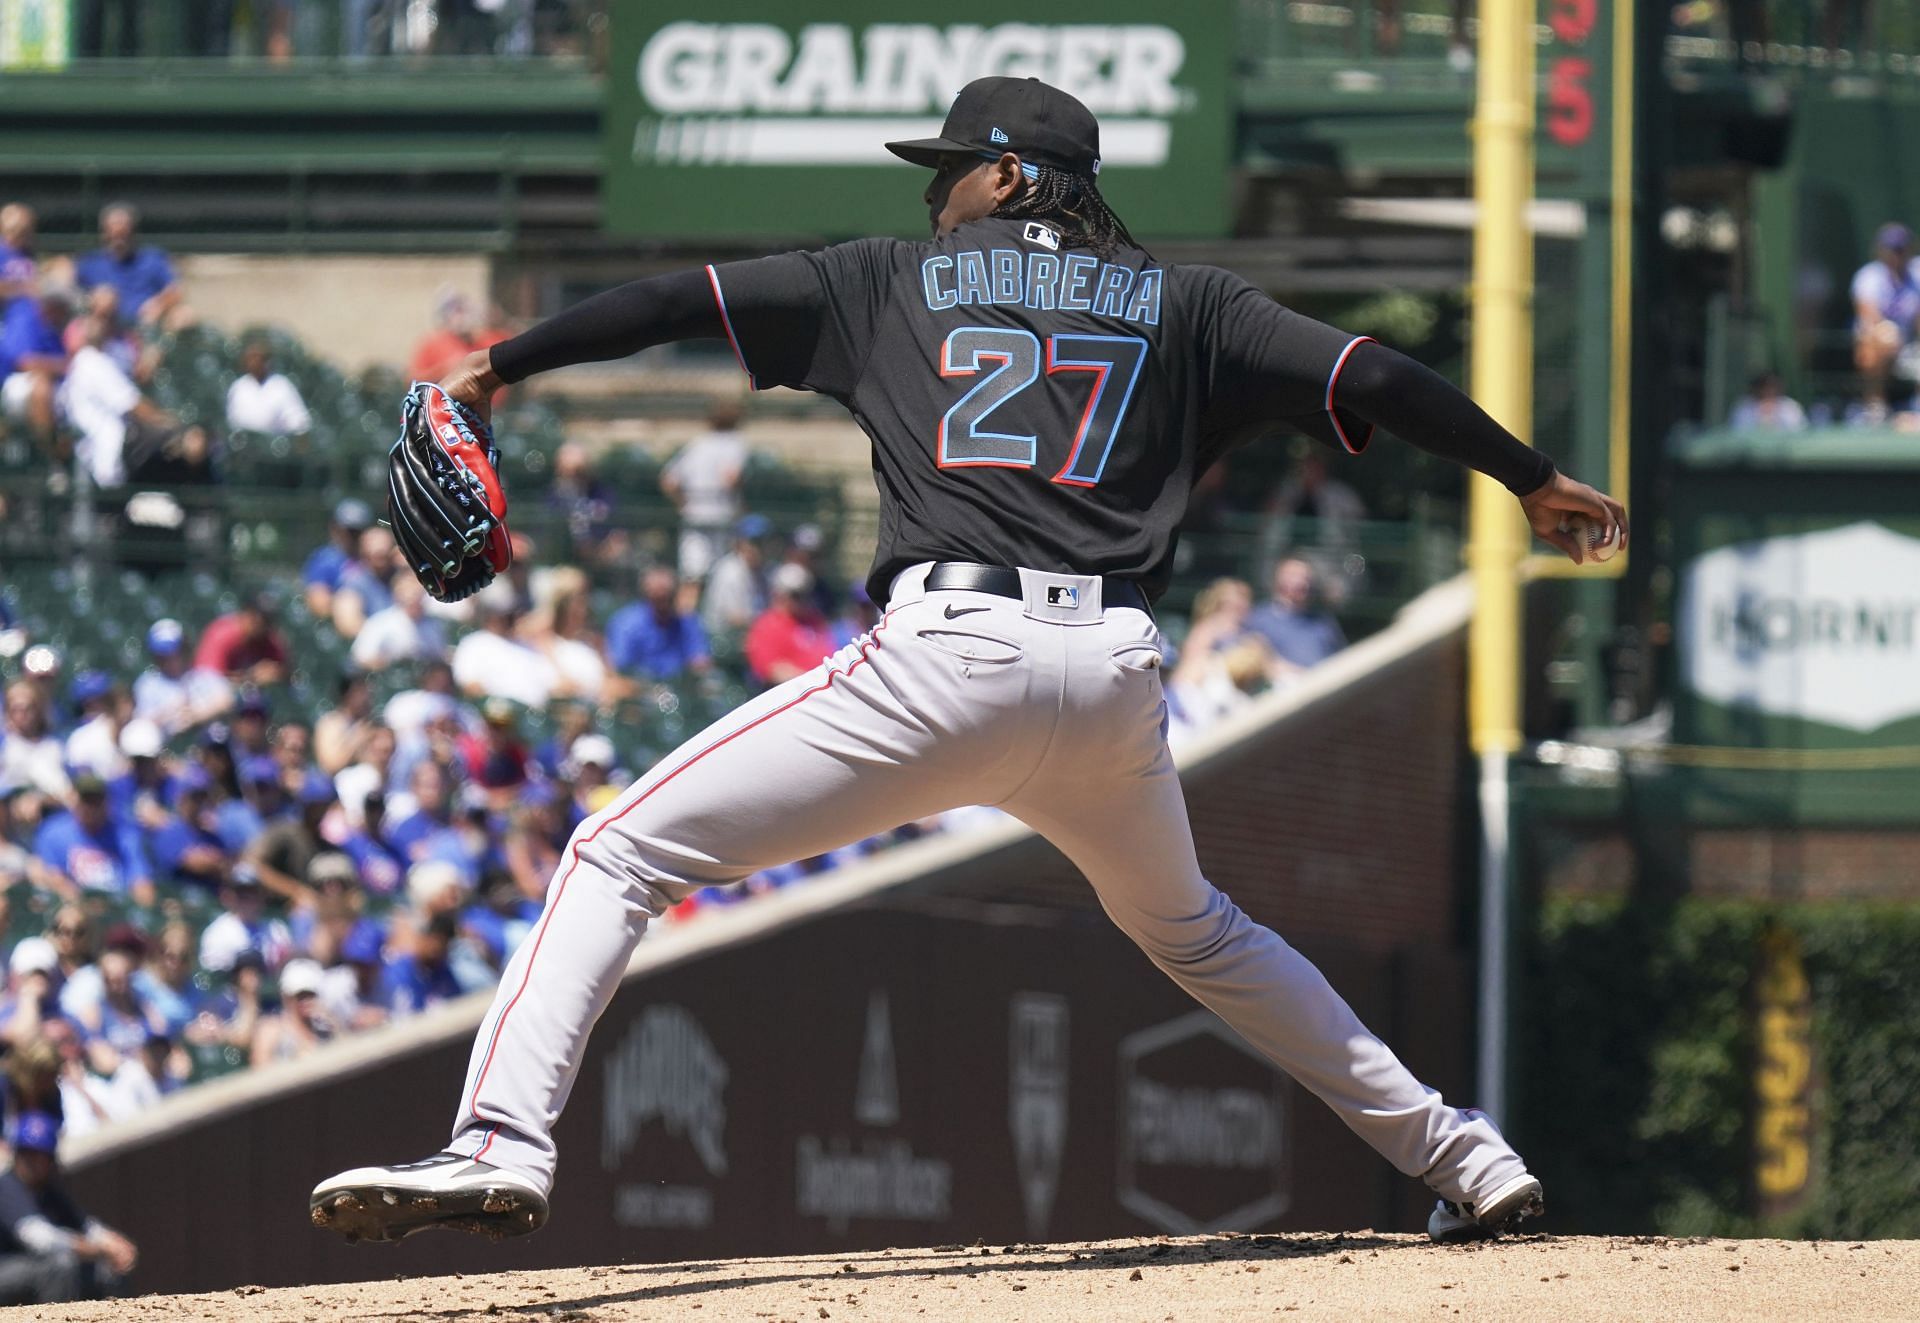 Edward Cabrera #27 of the Miami Marlins throws a pitch during the first inning against the Chicago Cubs at Wrigley Field on August 05